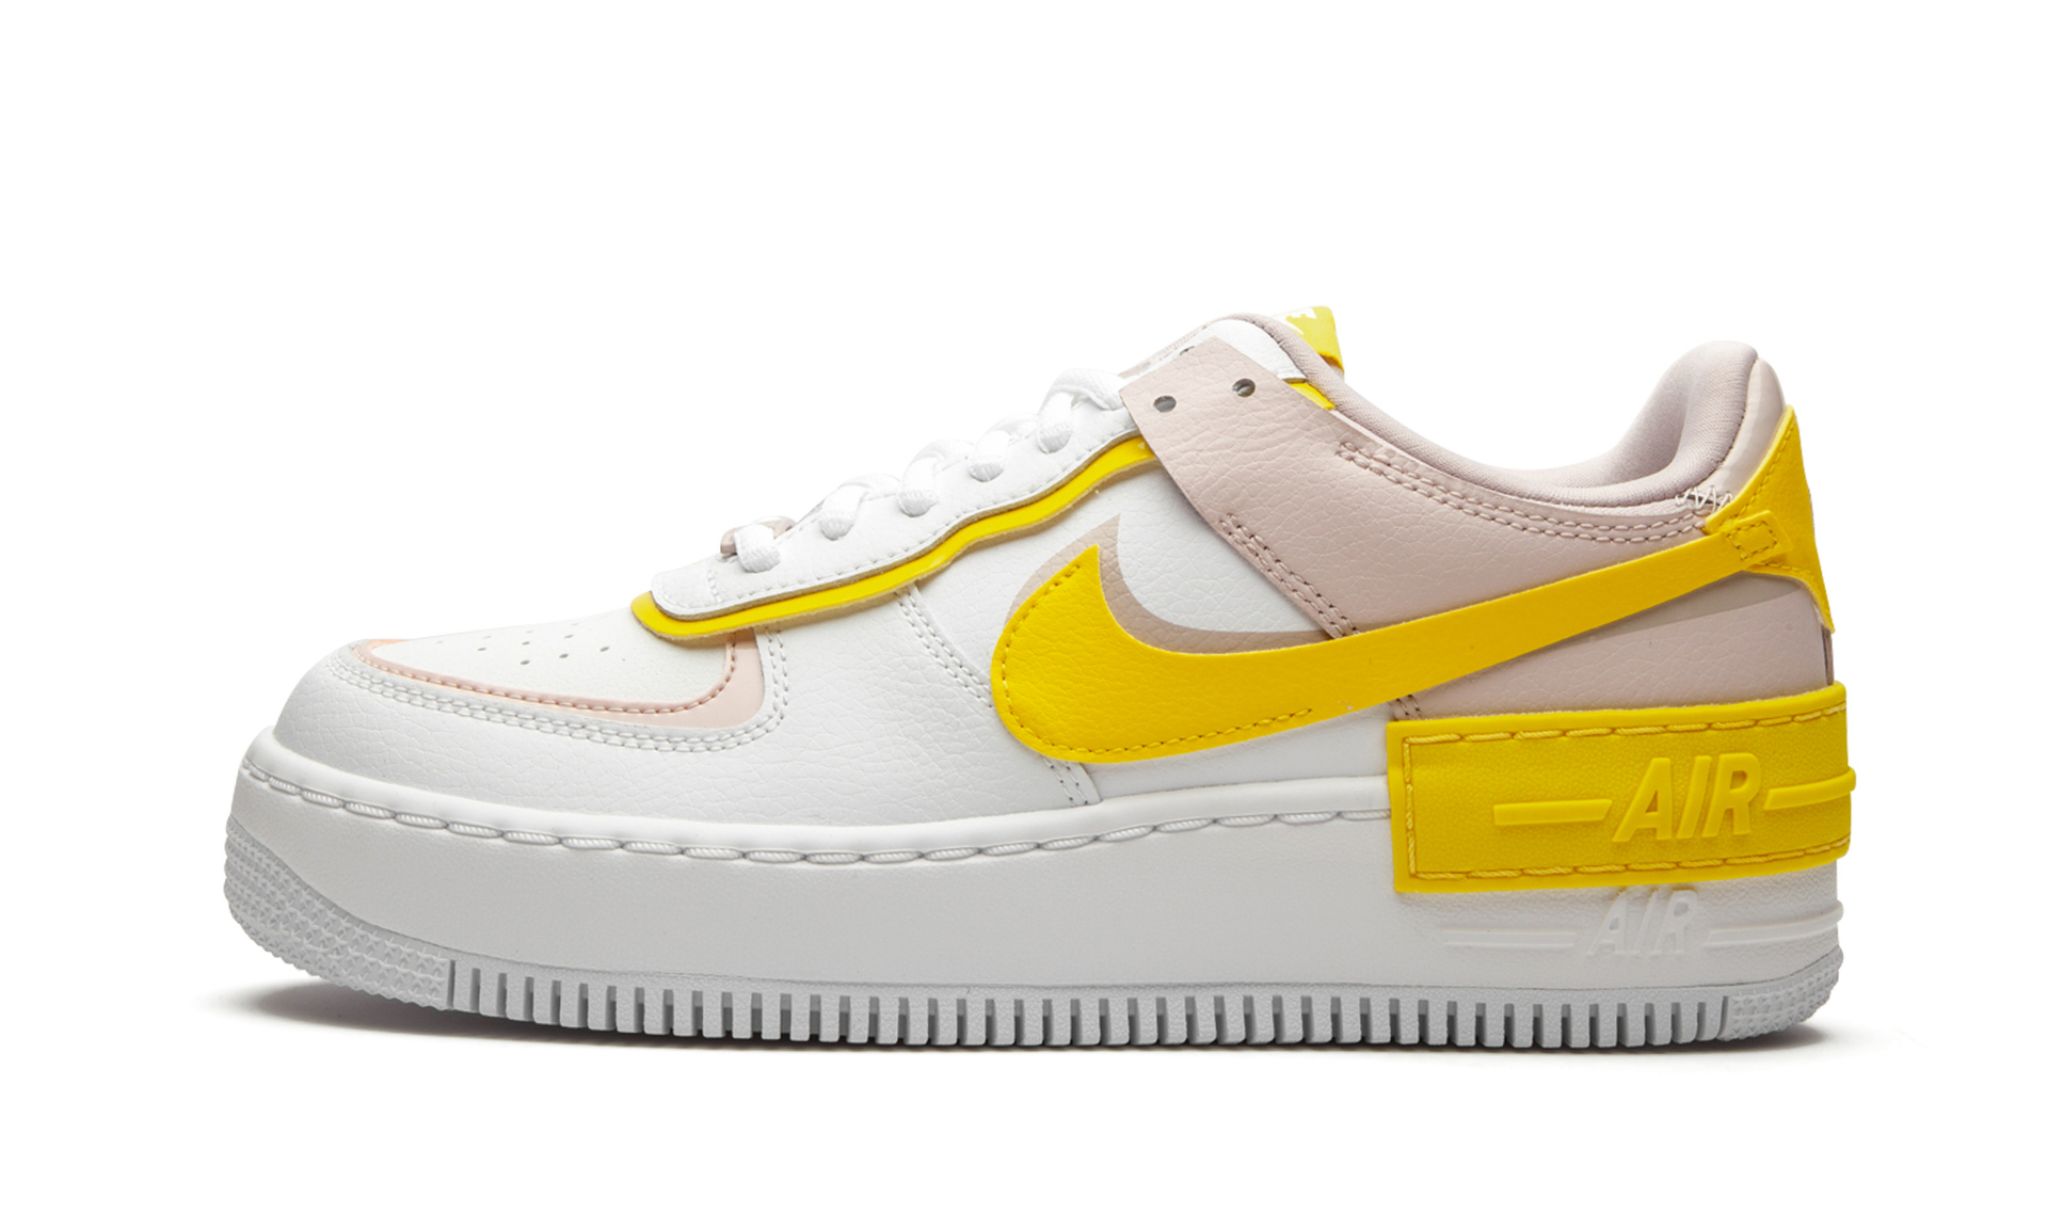 Nike air force 1 low shadow. Nike Air Force 1 Shadow White. Nike Air Force 1 Shadow Yellow White. Nike Air Force 1 Shadow White White. Nike Air Force 1 Shadow белые.